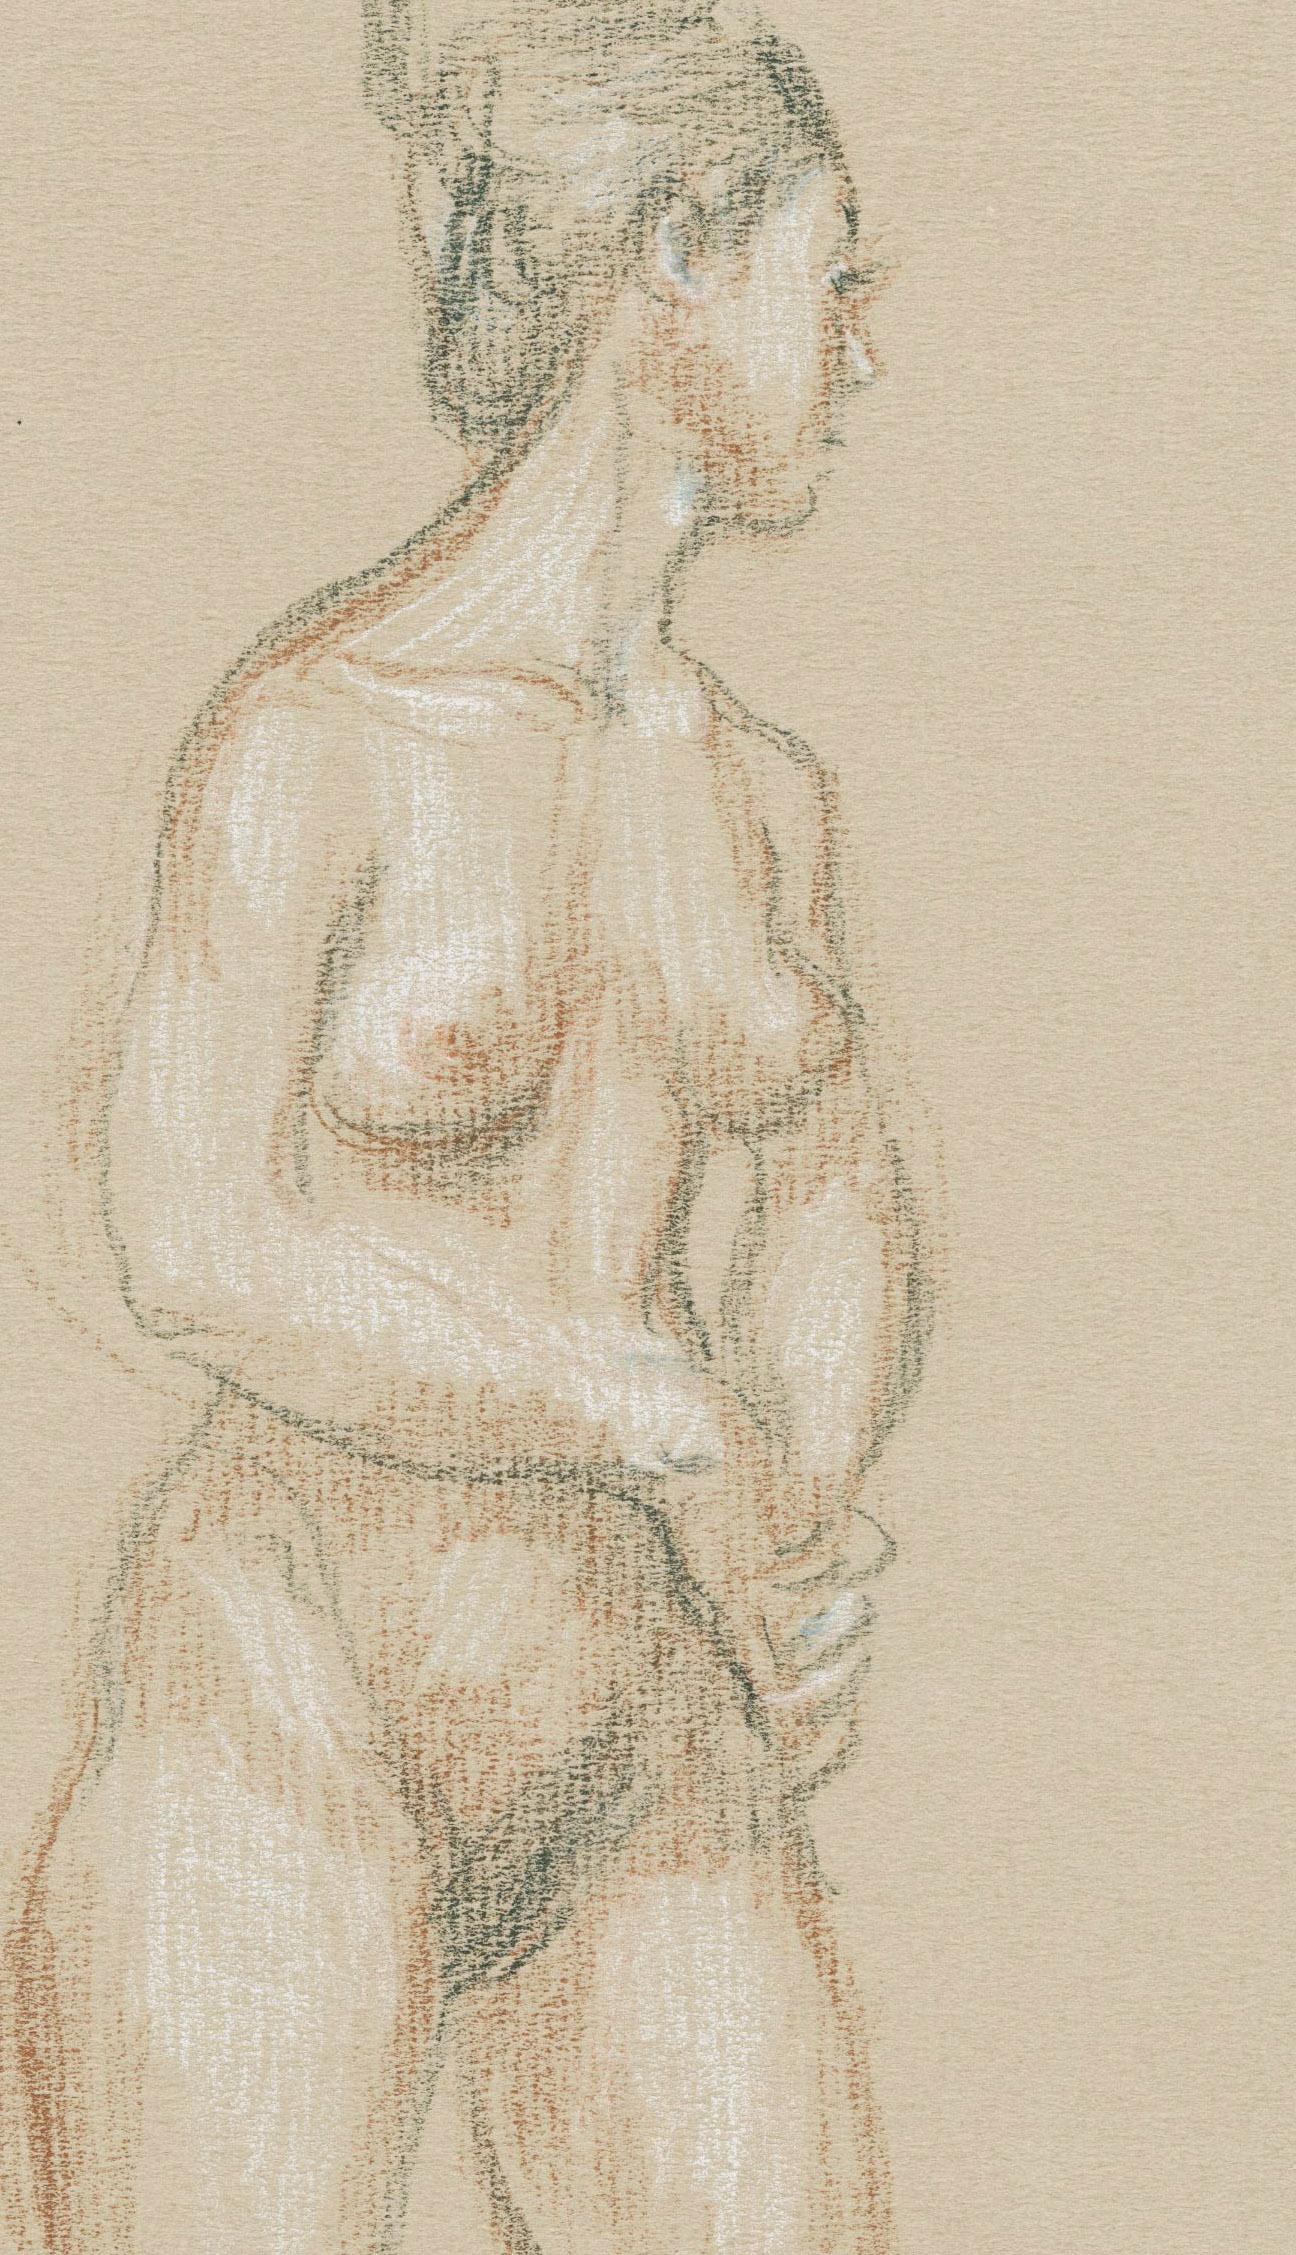 Standing Female Nude
Colored chalks on tan Strathmore paper, c. 1975
Signed in chalk upper right (see photo)
Condition: Excellent
         Housed in an 8 play acid free rag matting
Sheet size: 12 1/2 x 9 1/2 inches
Provenance: Estate of the artist
 